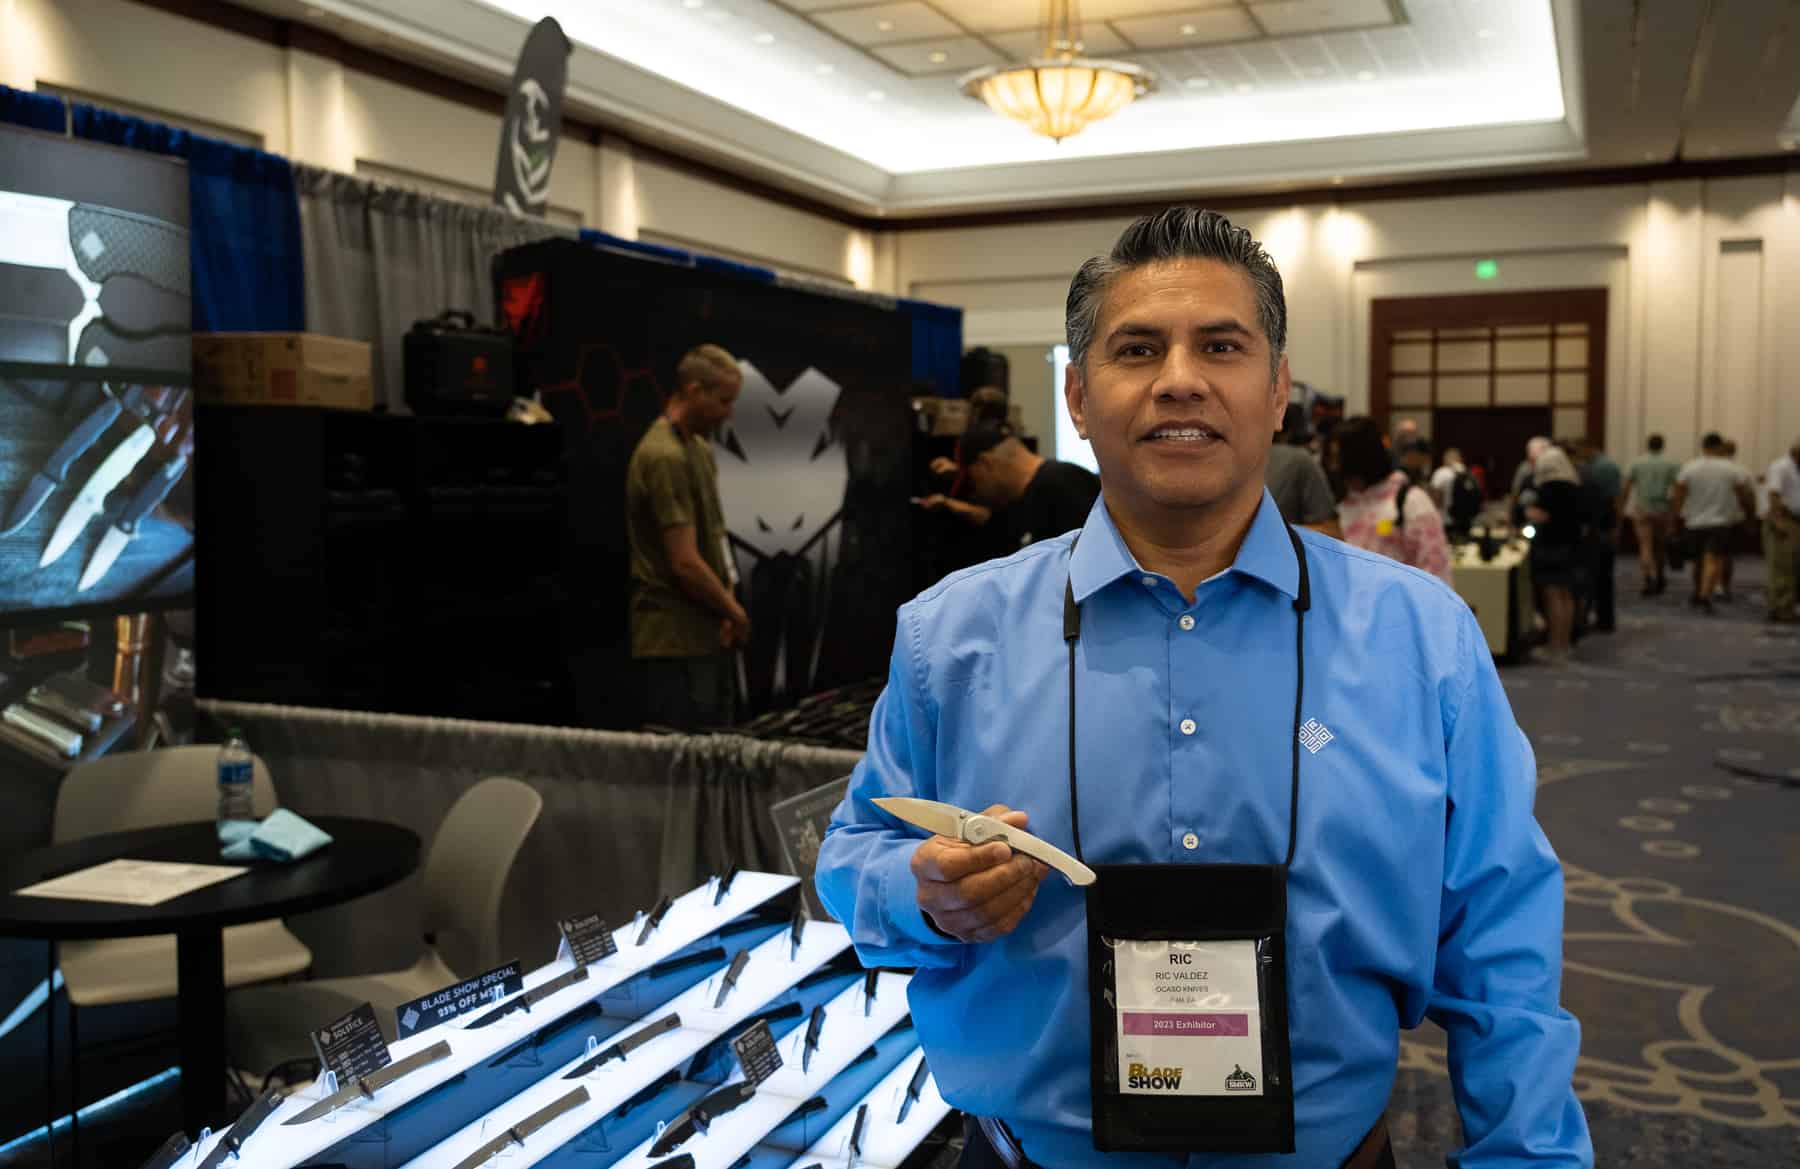 Ric Valdez of Ocaso Knives showing of a new model at Blade Show 2023.